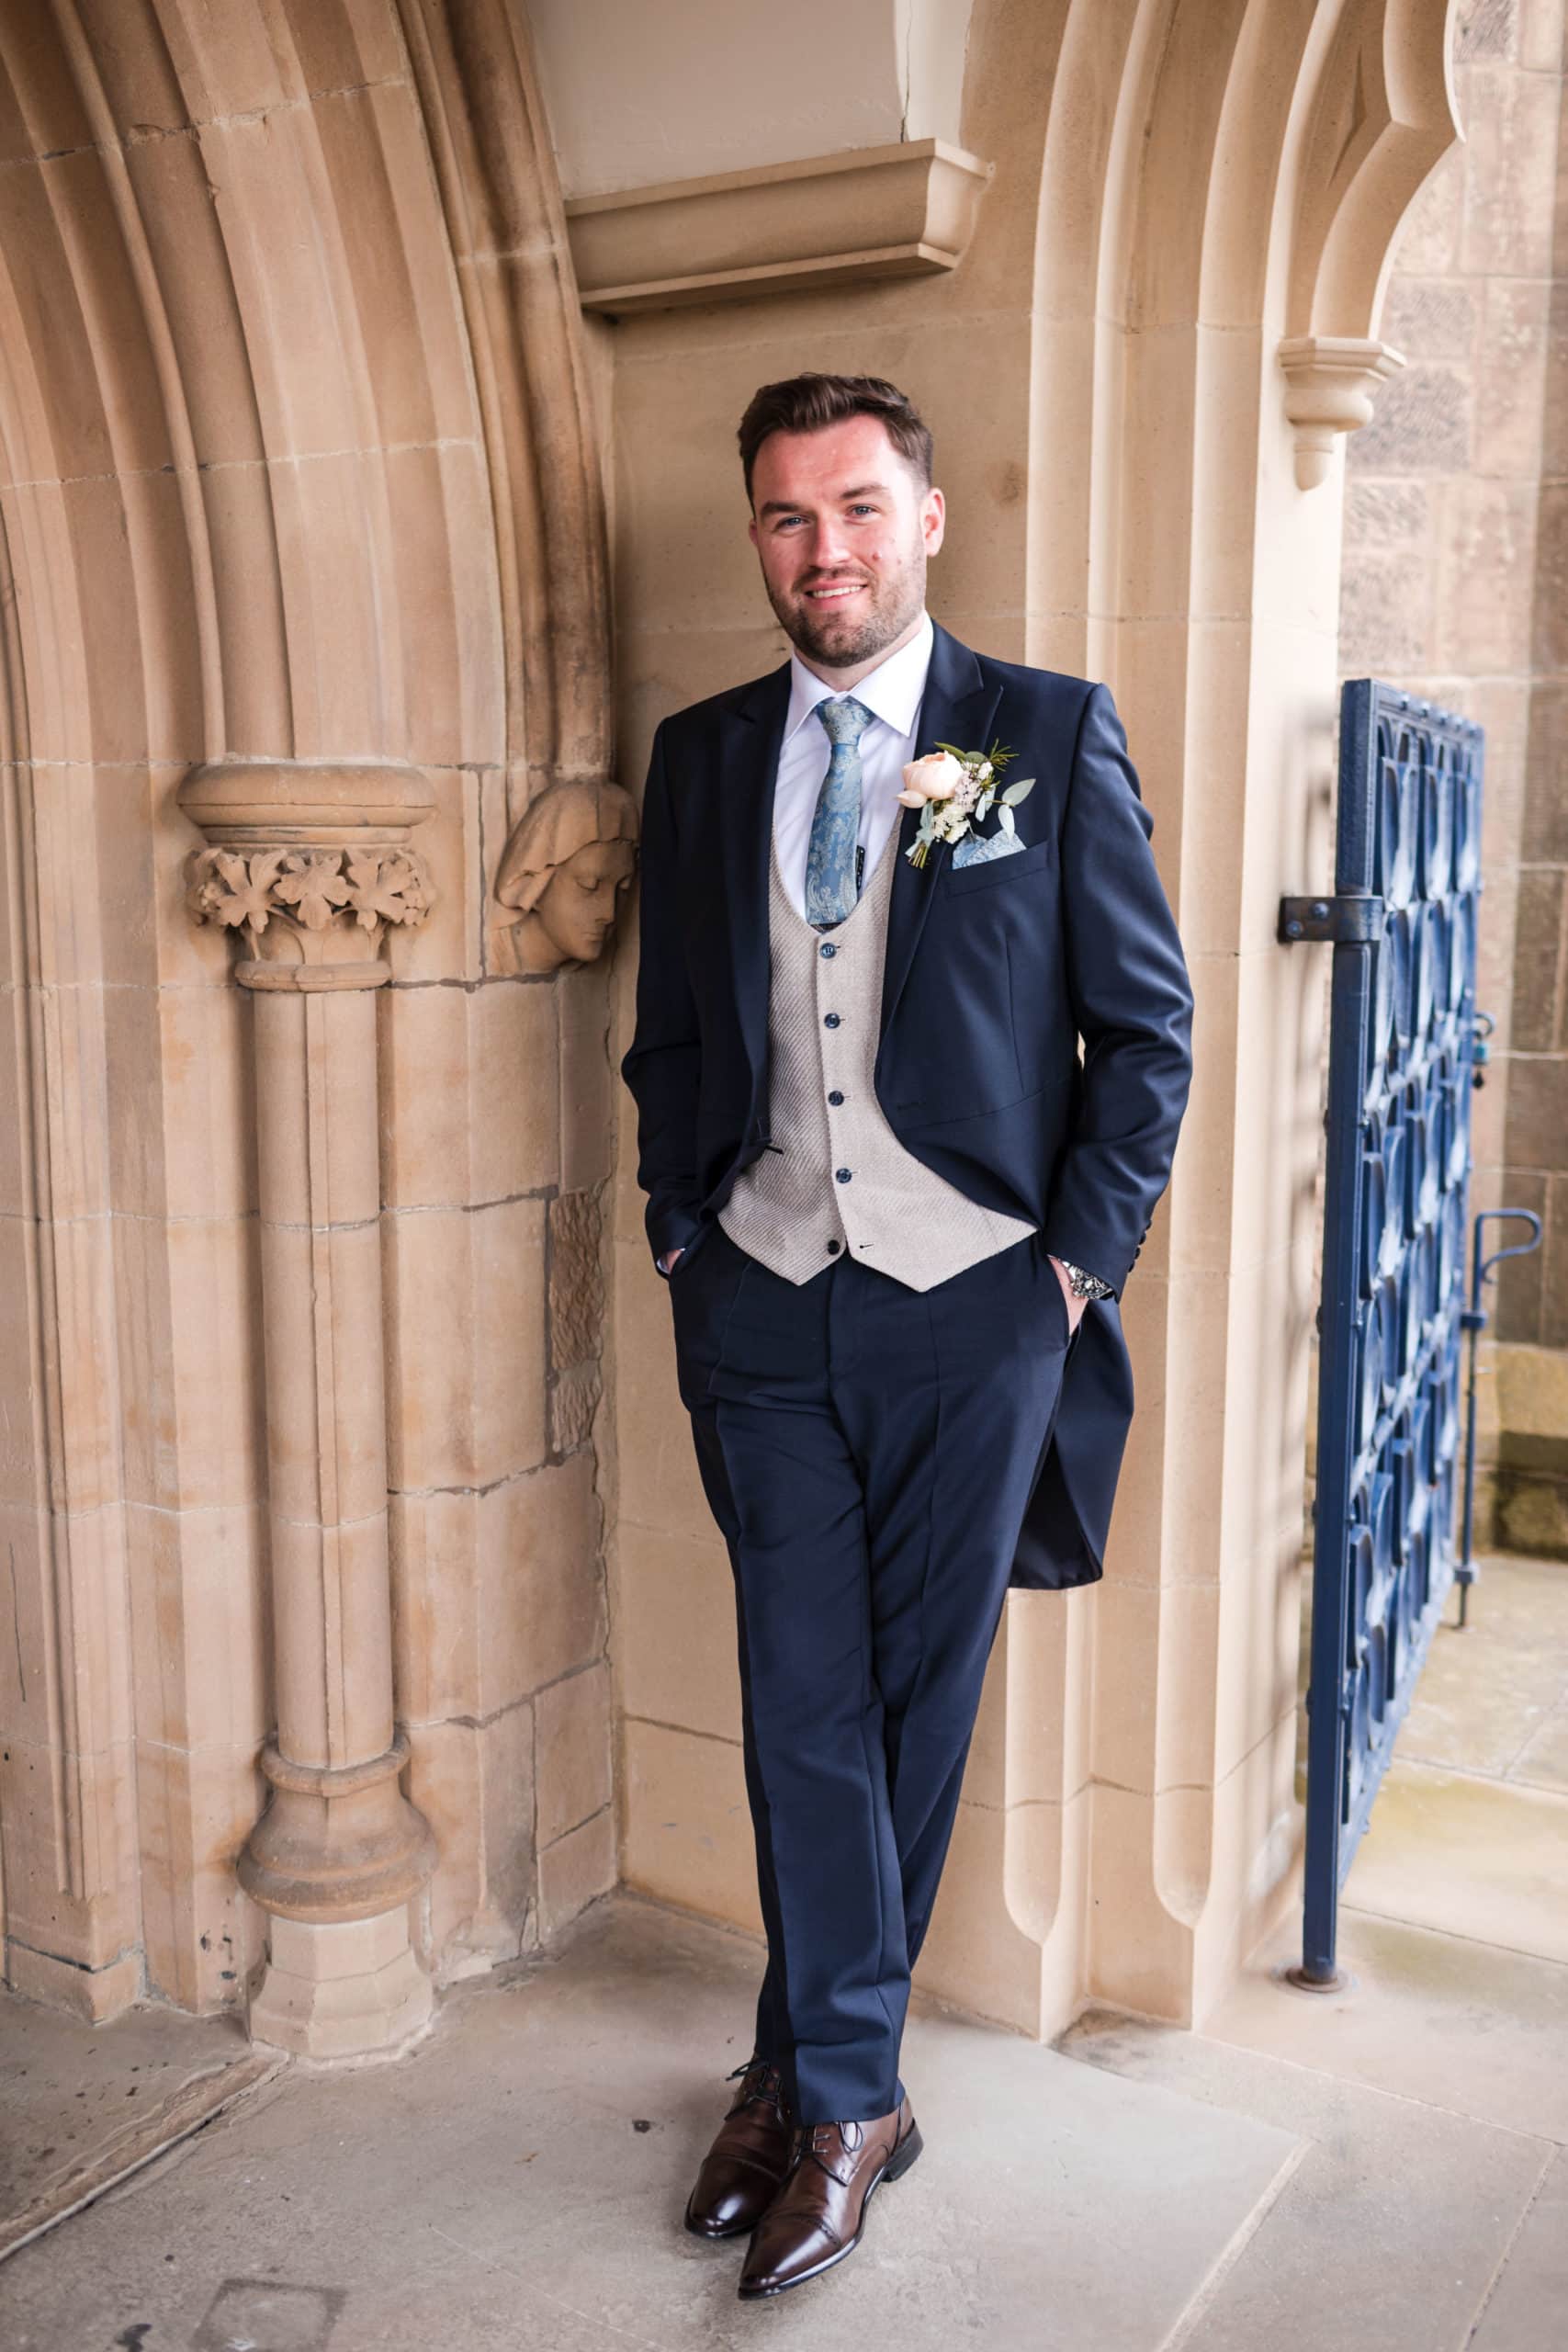 Groom wearing traditional Navy wedding morning suit with pale blue tie at Shrewsbury Cathedral